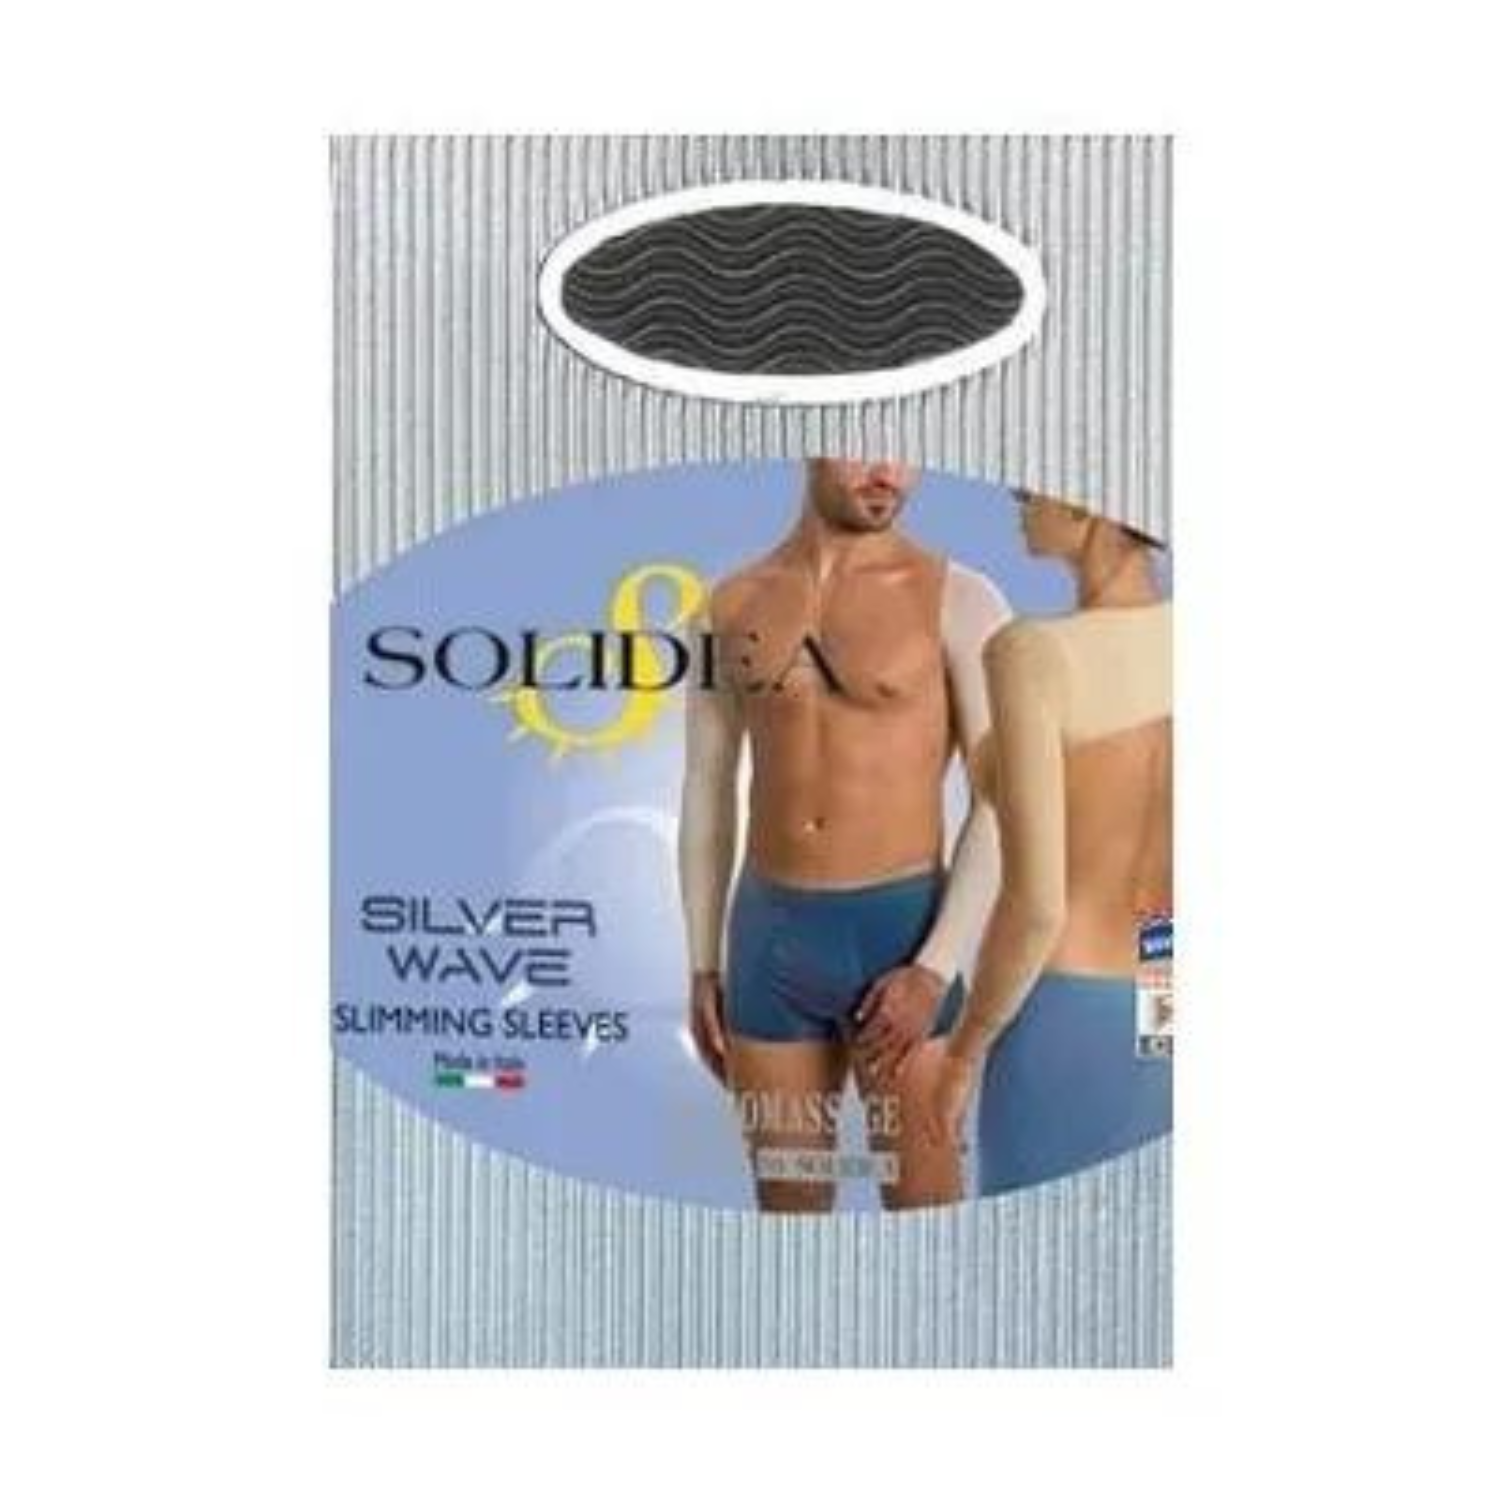 Solidea Silver Wave Slimming Sleeves Maneci 1S Champagne